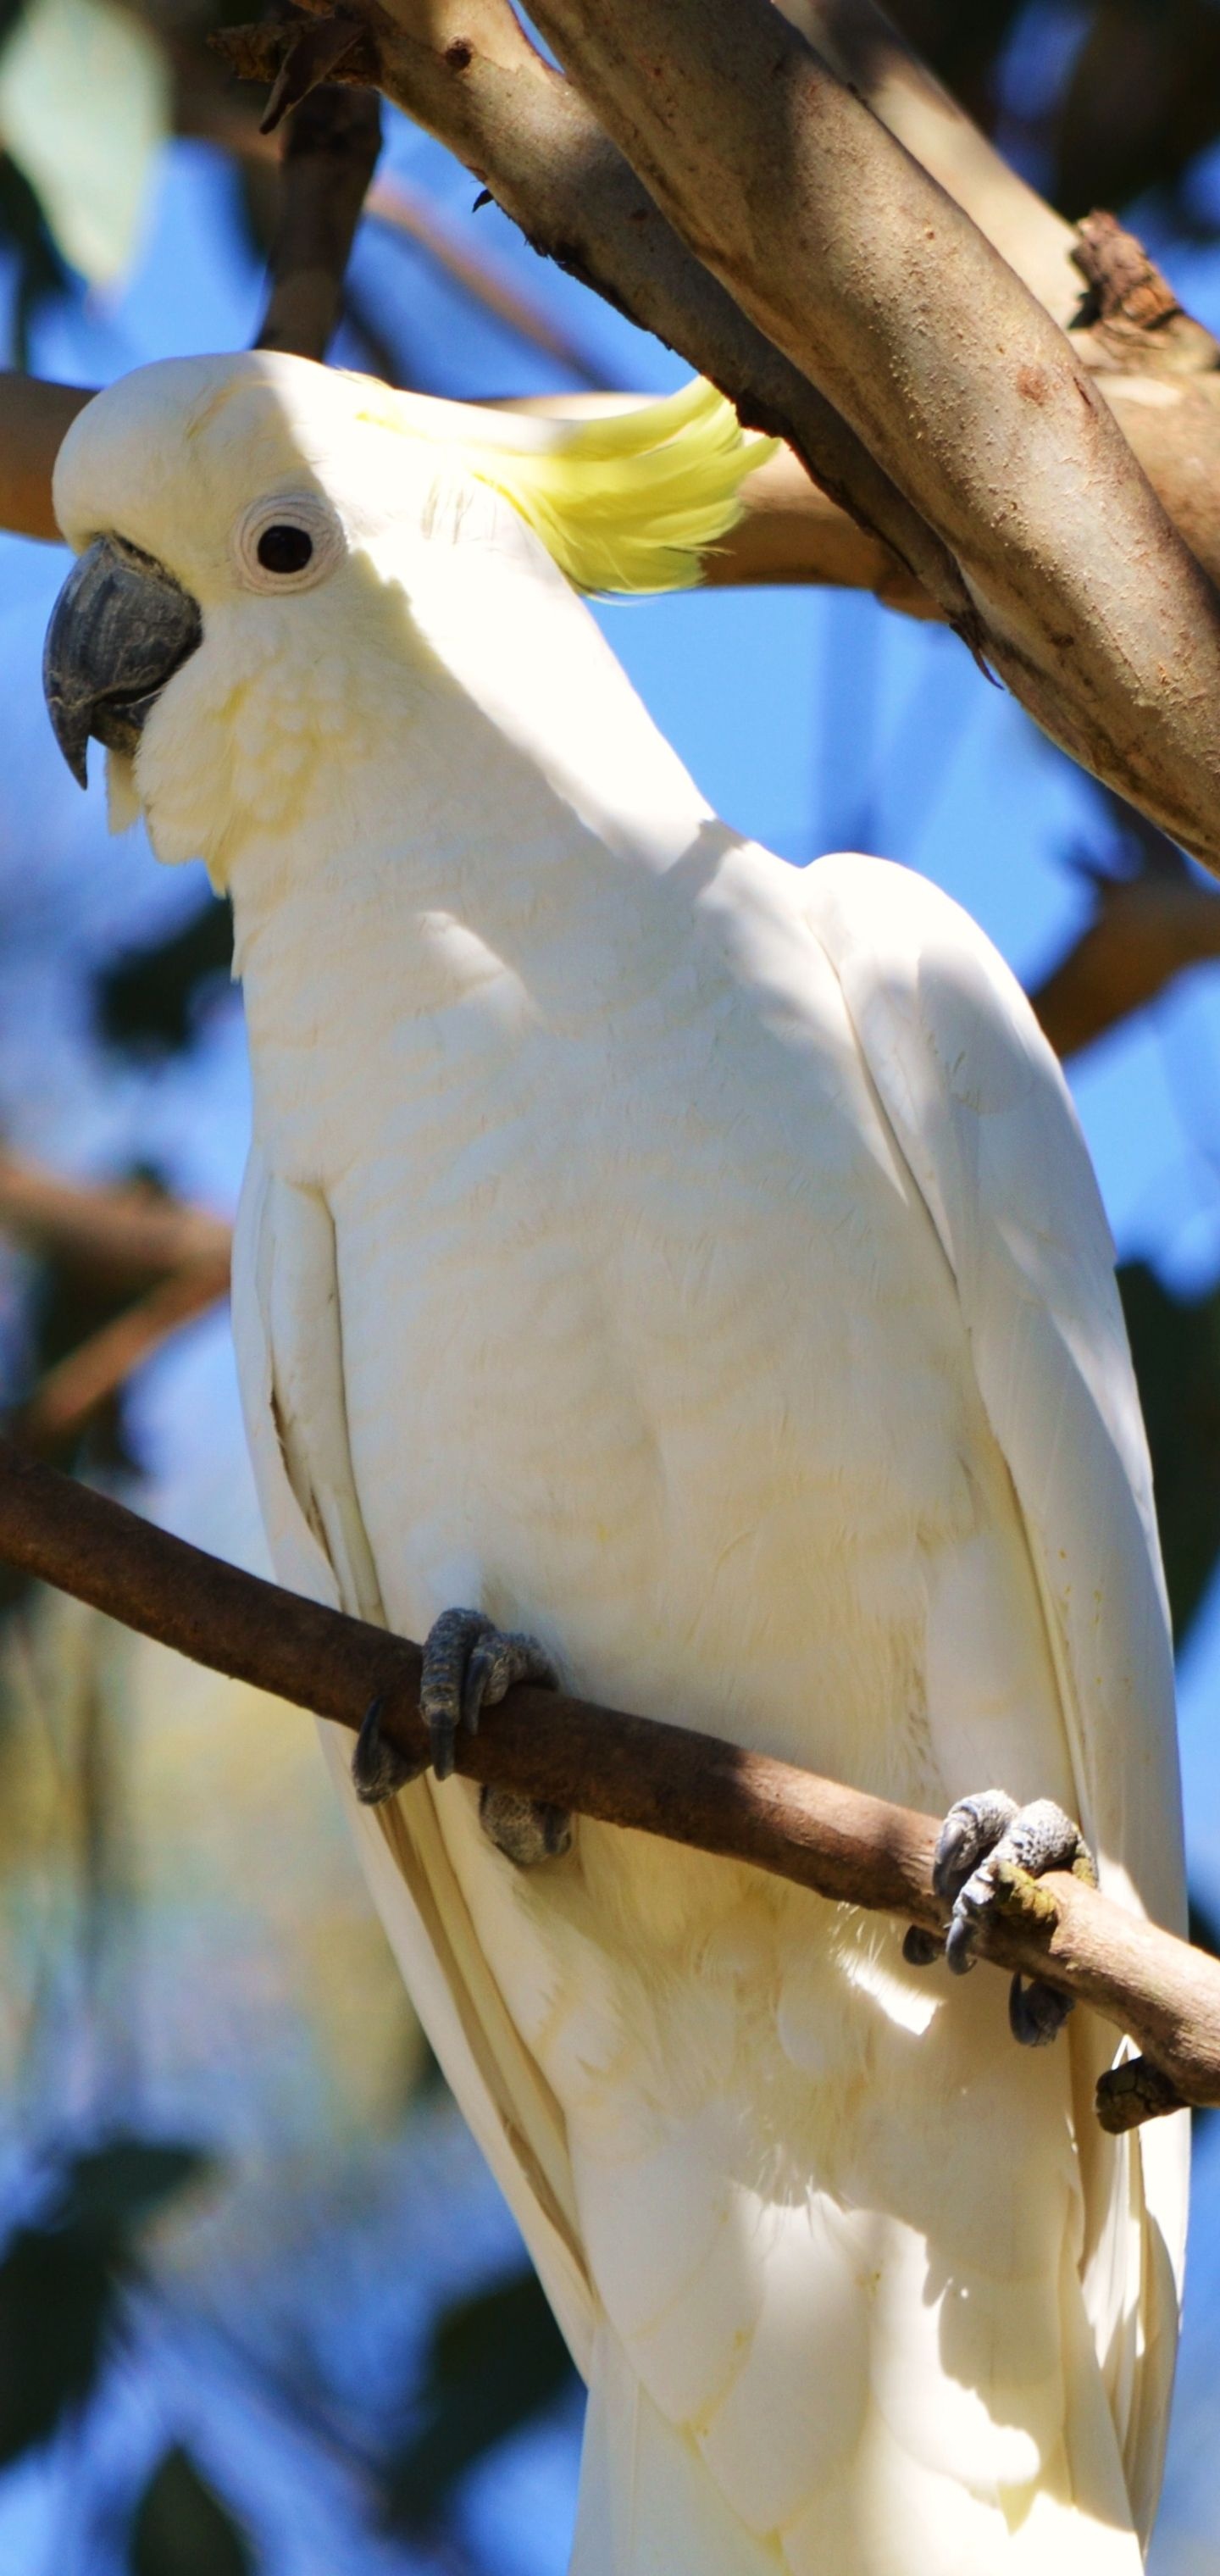 Cockatoo: White Parrot With Yellow Crest, Habitat In Australia, New Guinea, the Philippine Islands And Indonesia. 1440x3040 HD Wallpaper.